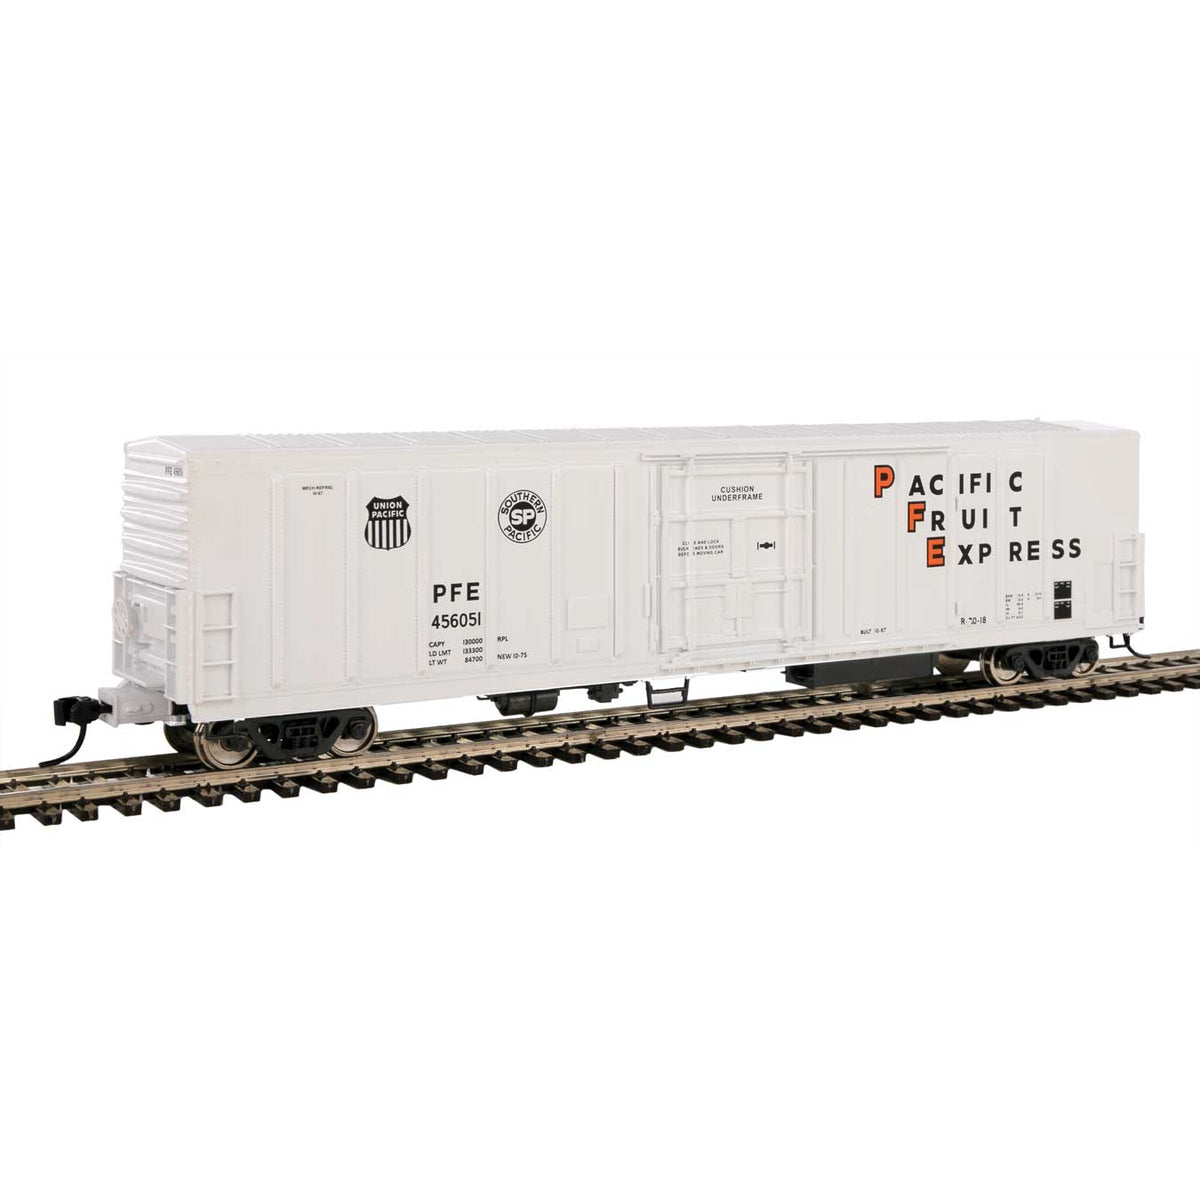 Walthers Mainline 910-3958 - HO 57' Mechanical Reefer - Ready to Run -- Pacific Fruit Express(TM) #456051 (white, black, orange)